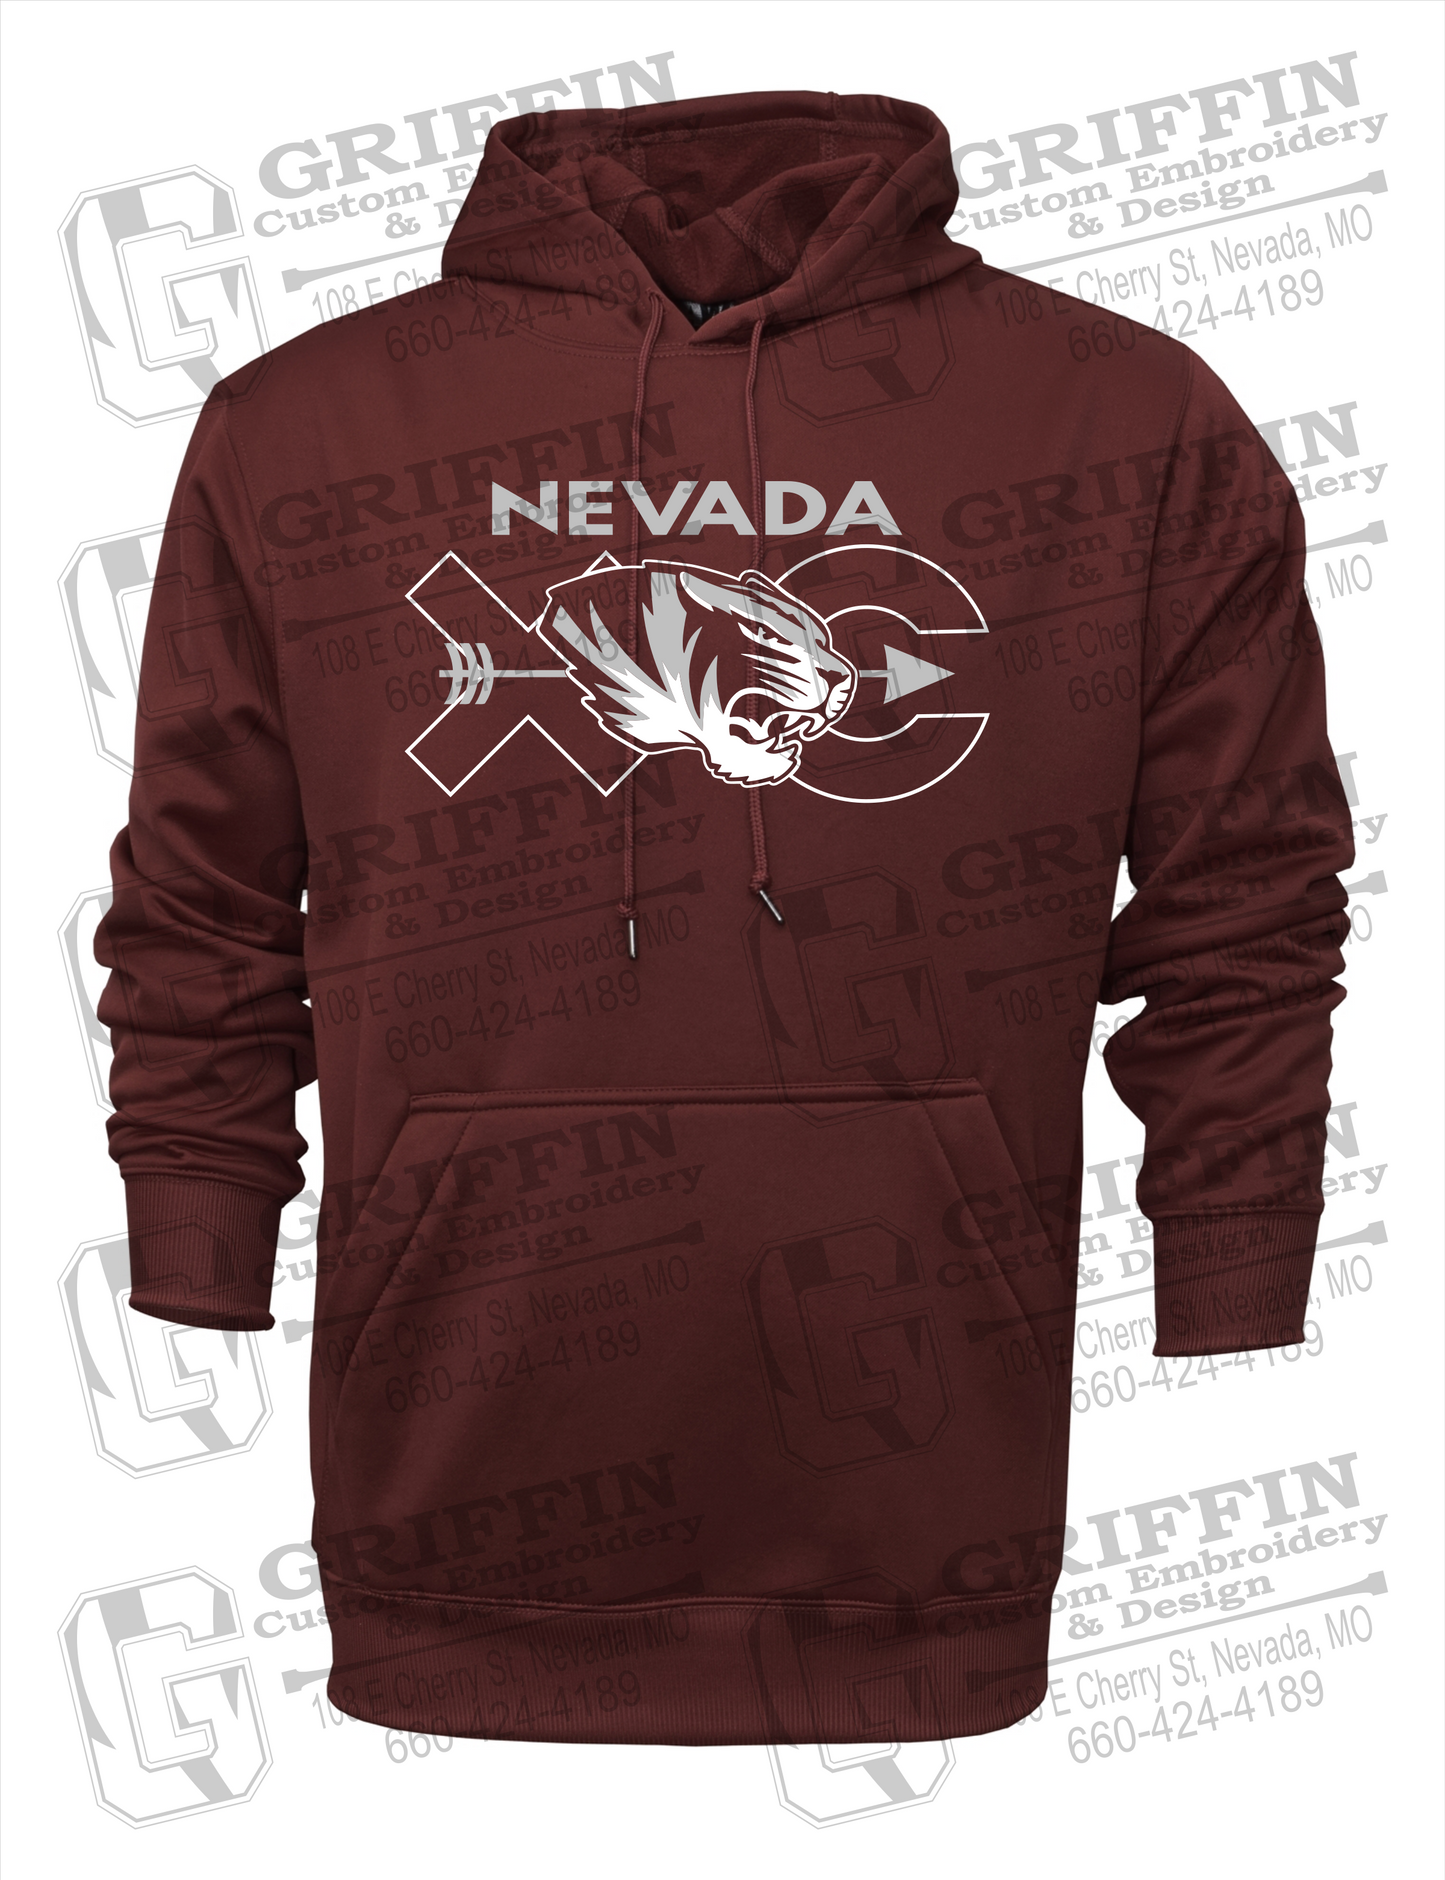 Nevada Tigers 23-T Youth Hoodie - Cross Country